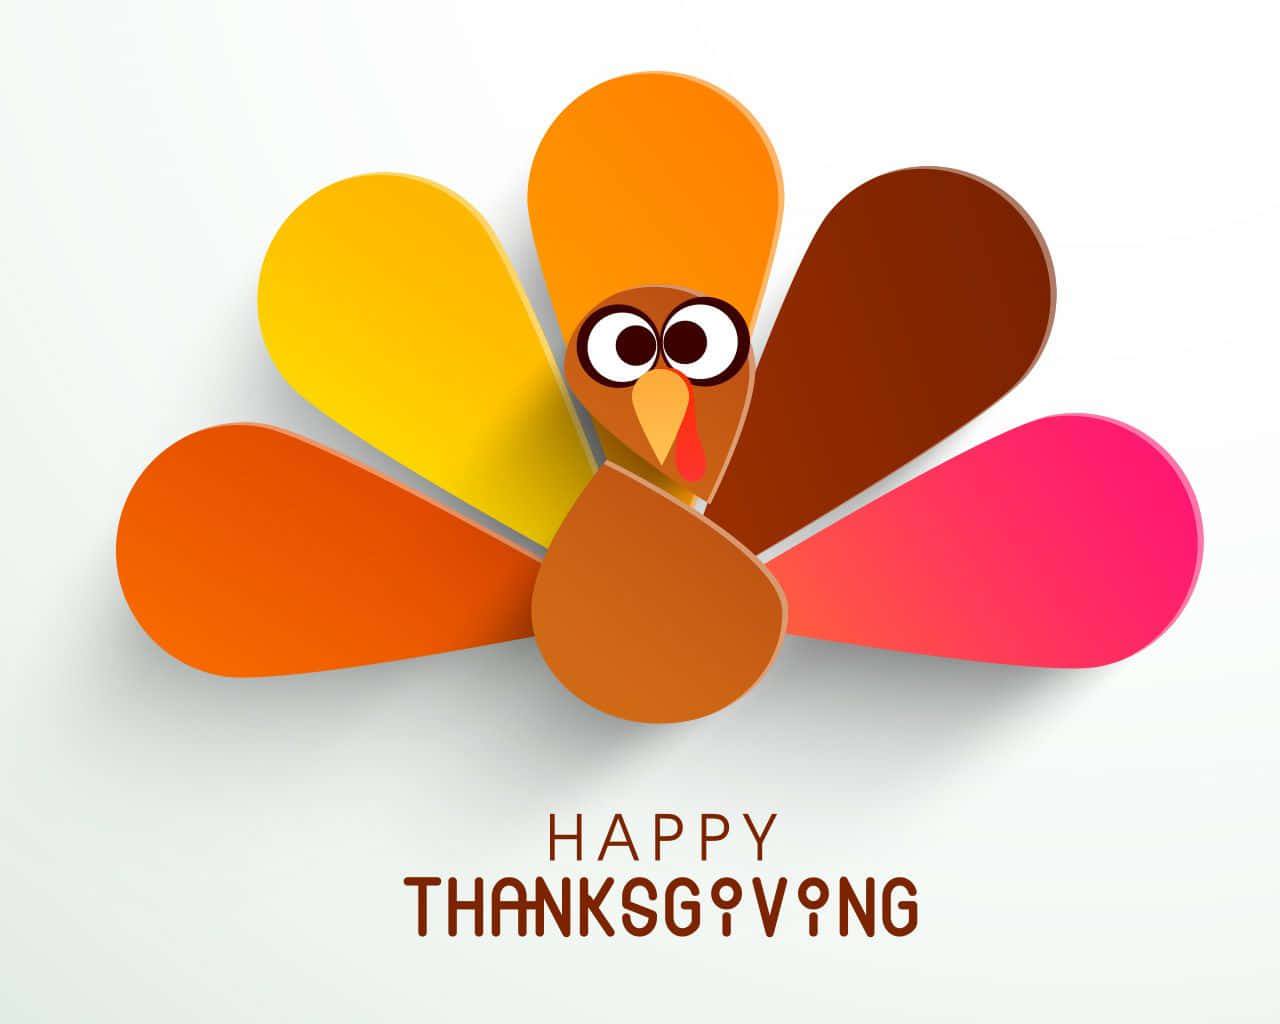 Wishing You And Your Family A Very Happy Thanksgiving!